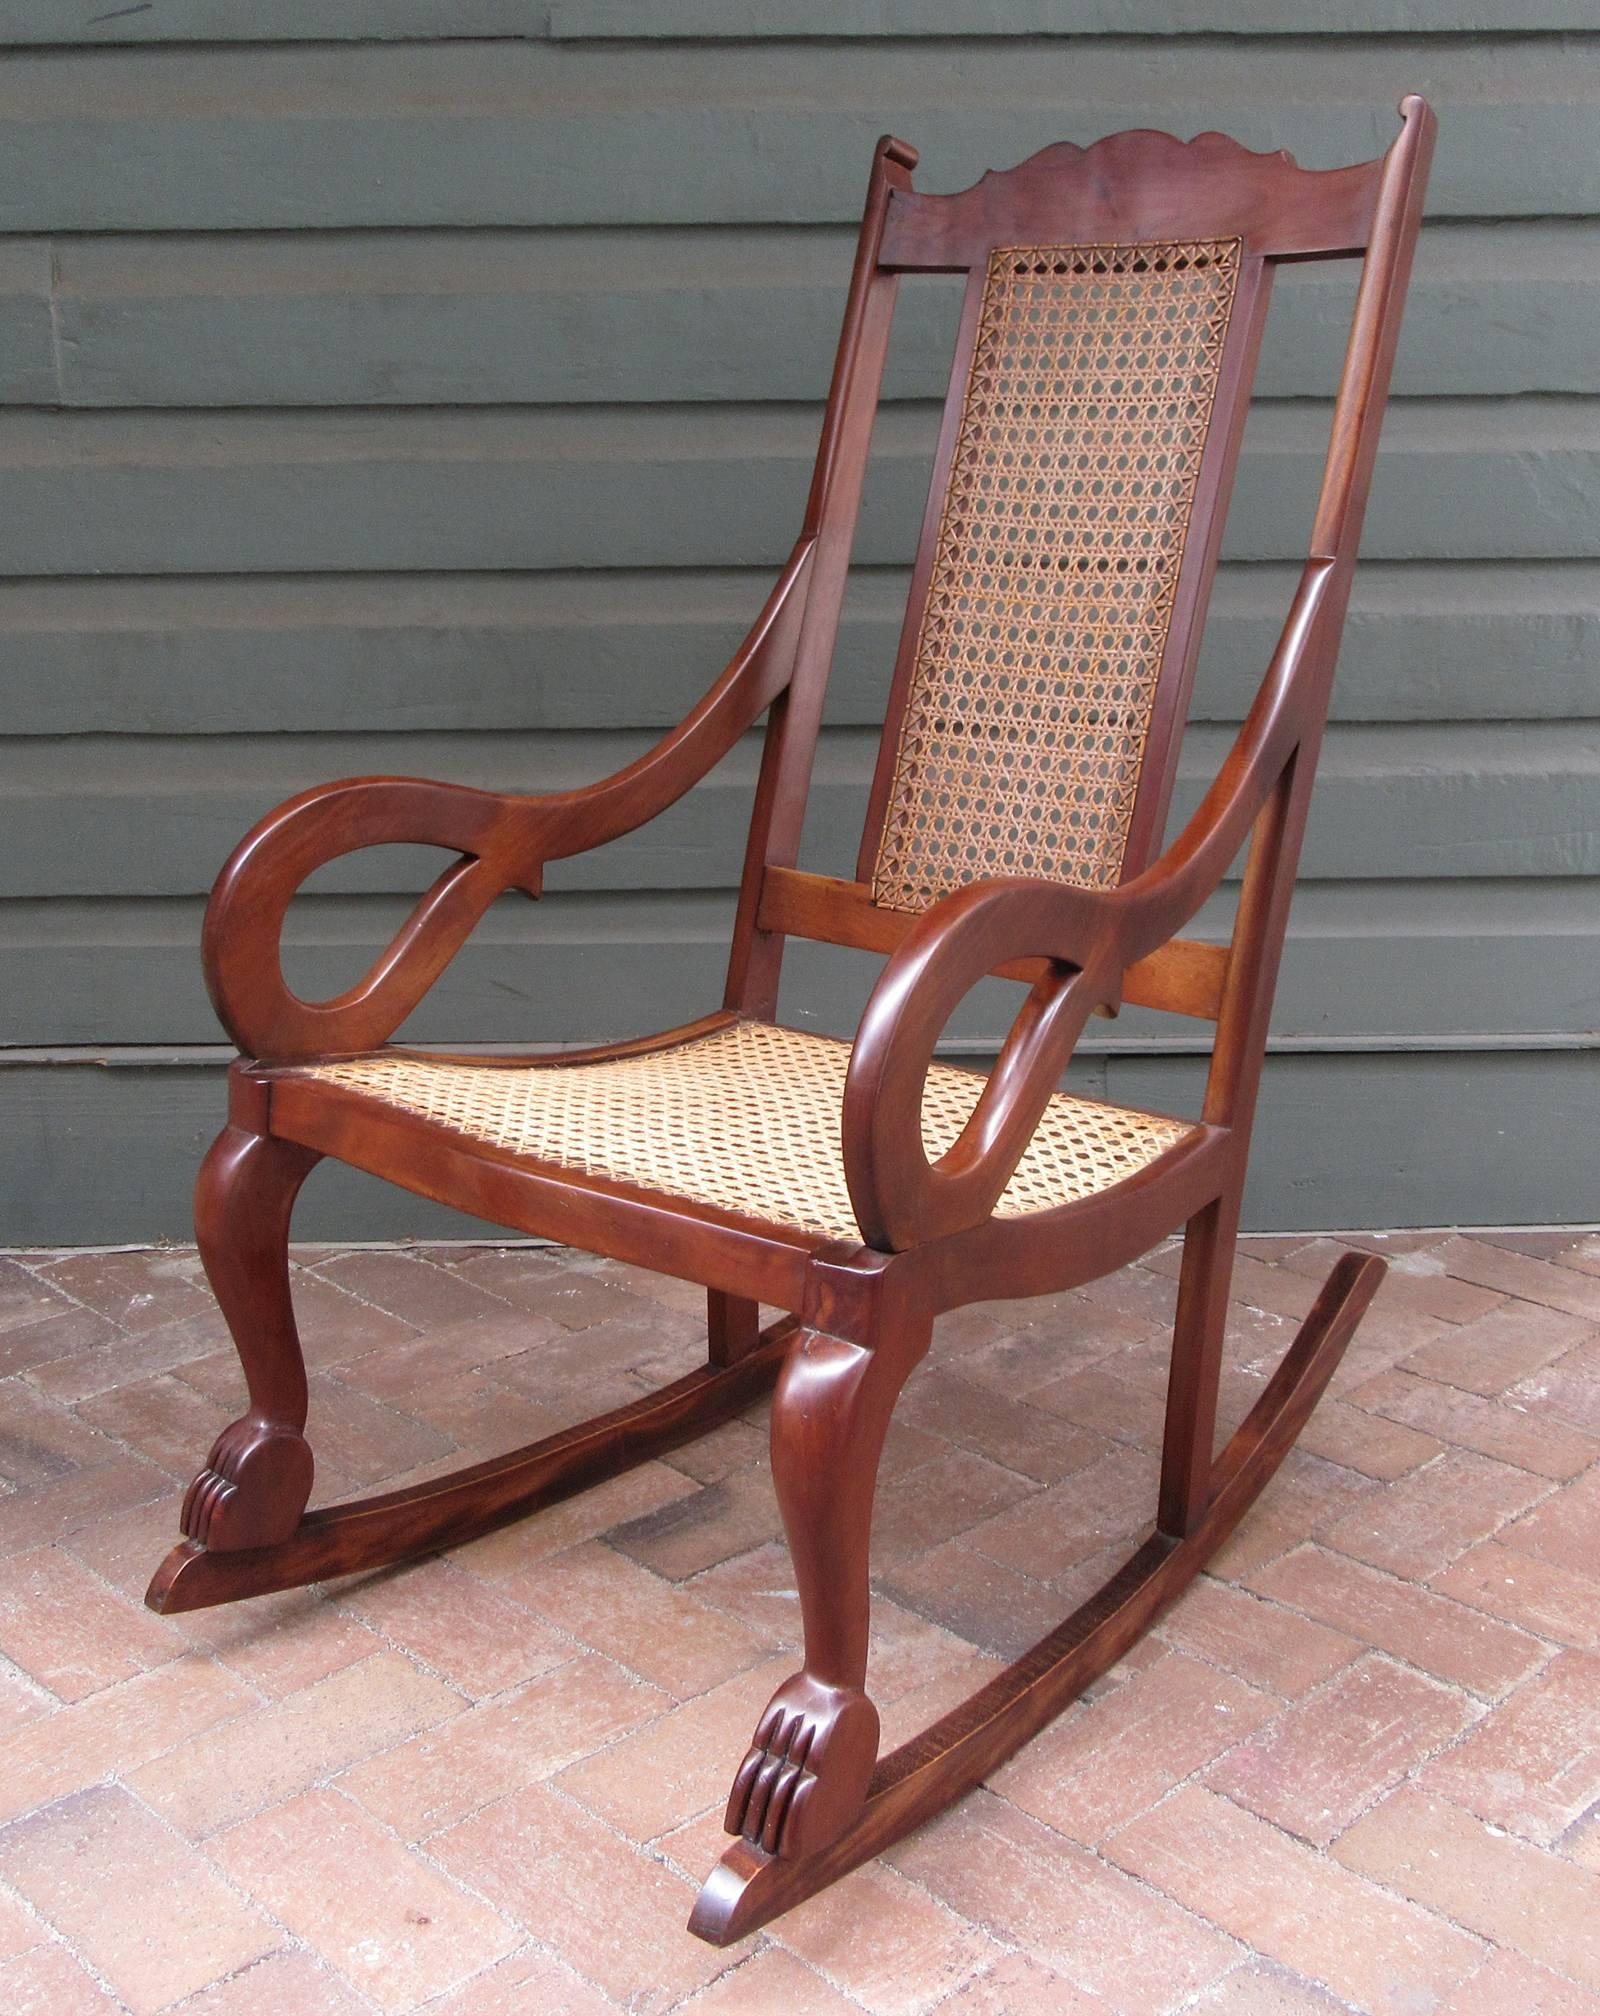 Early 19th Century Caribbean Regency Mahogany and Cane Rocking Chair For Sale 2